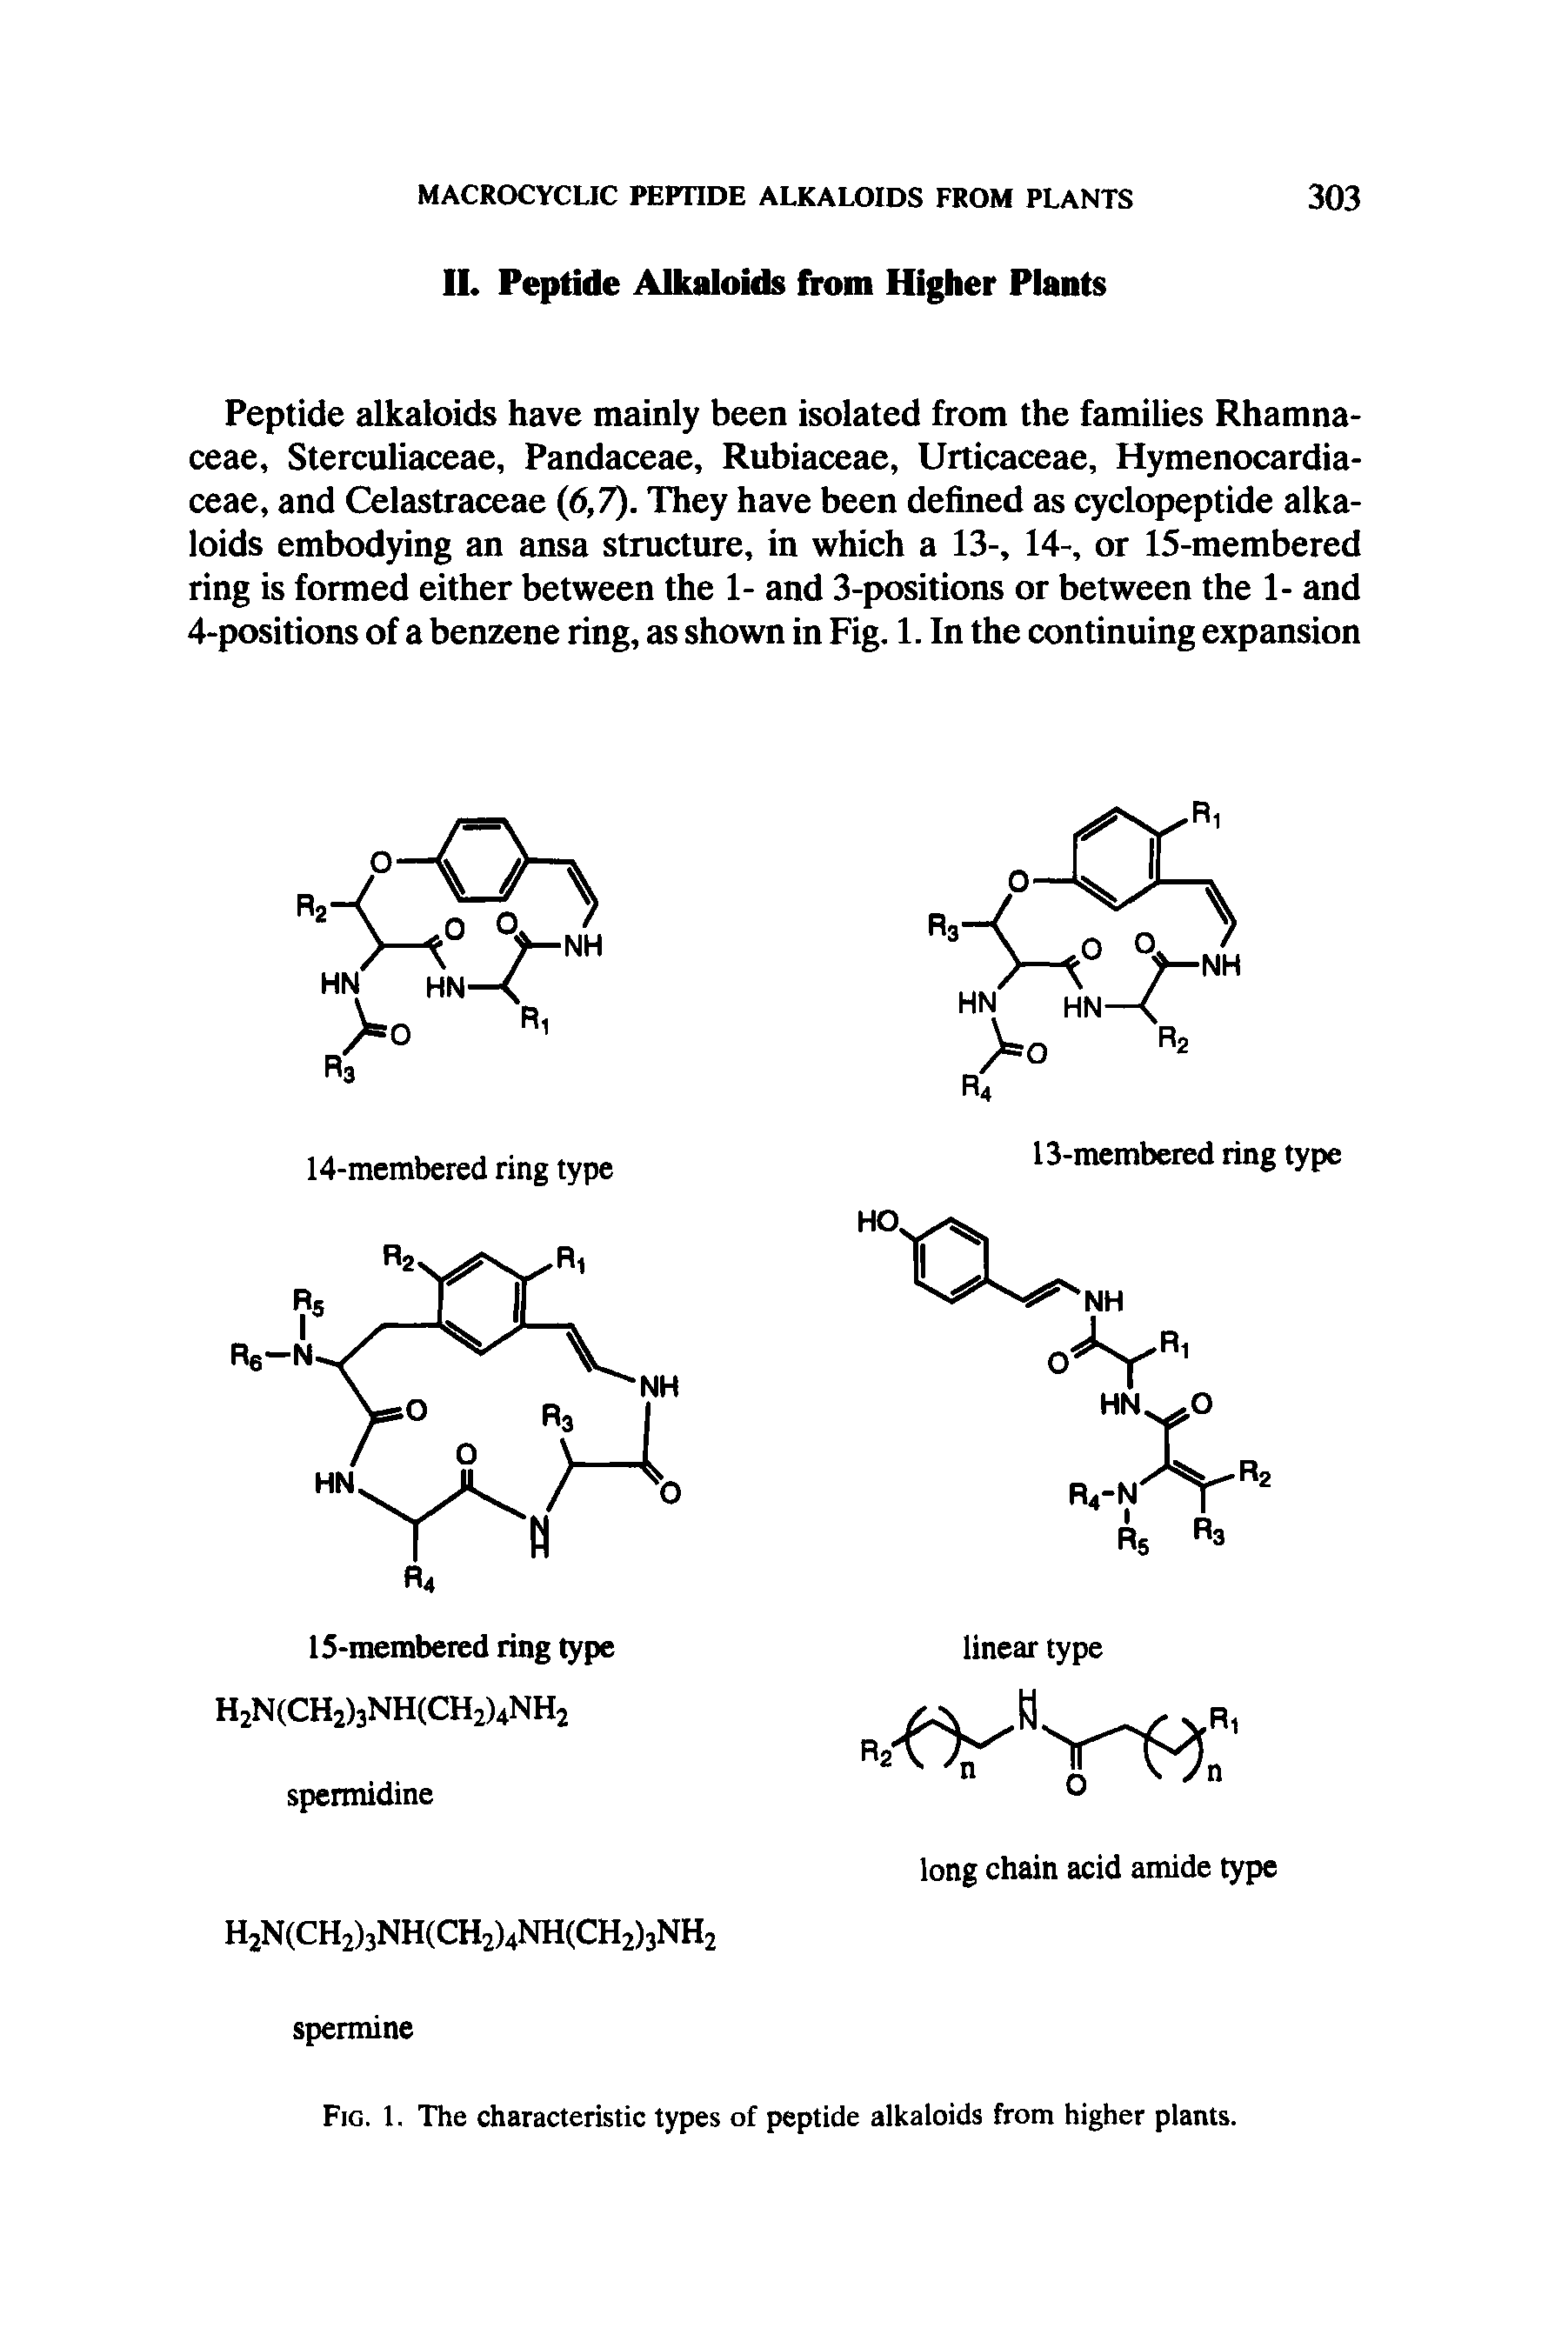 Fig. 1. The characteristic types of peptide alkaloids from higher plants.